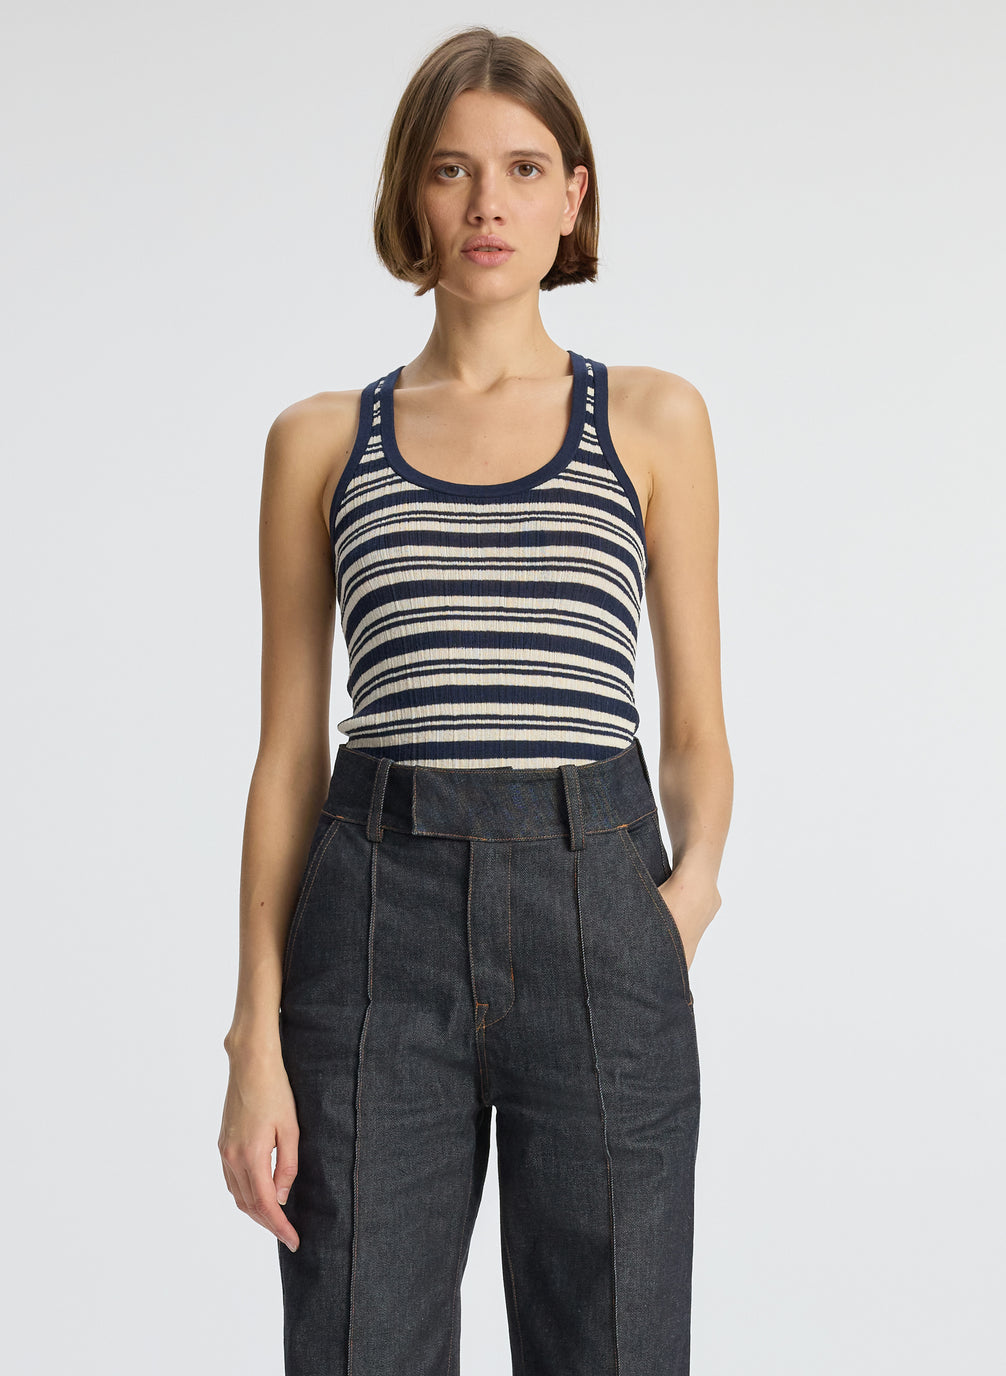 front view of woman wearing navy blue striped tank top and dark wash raw denim jeans